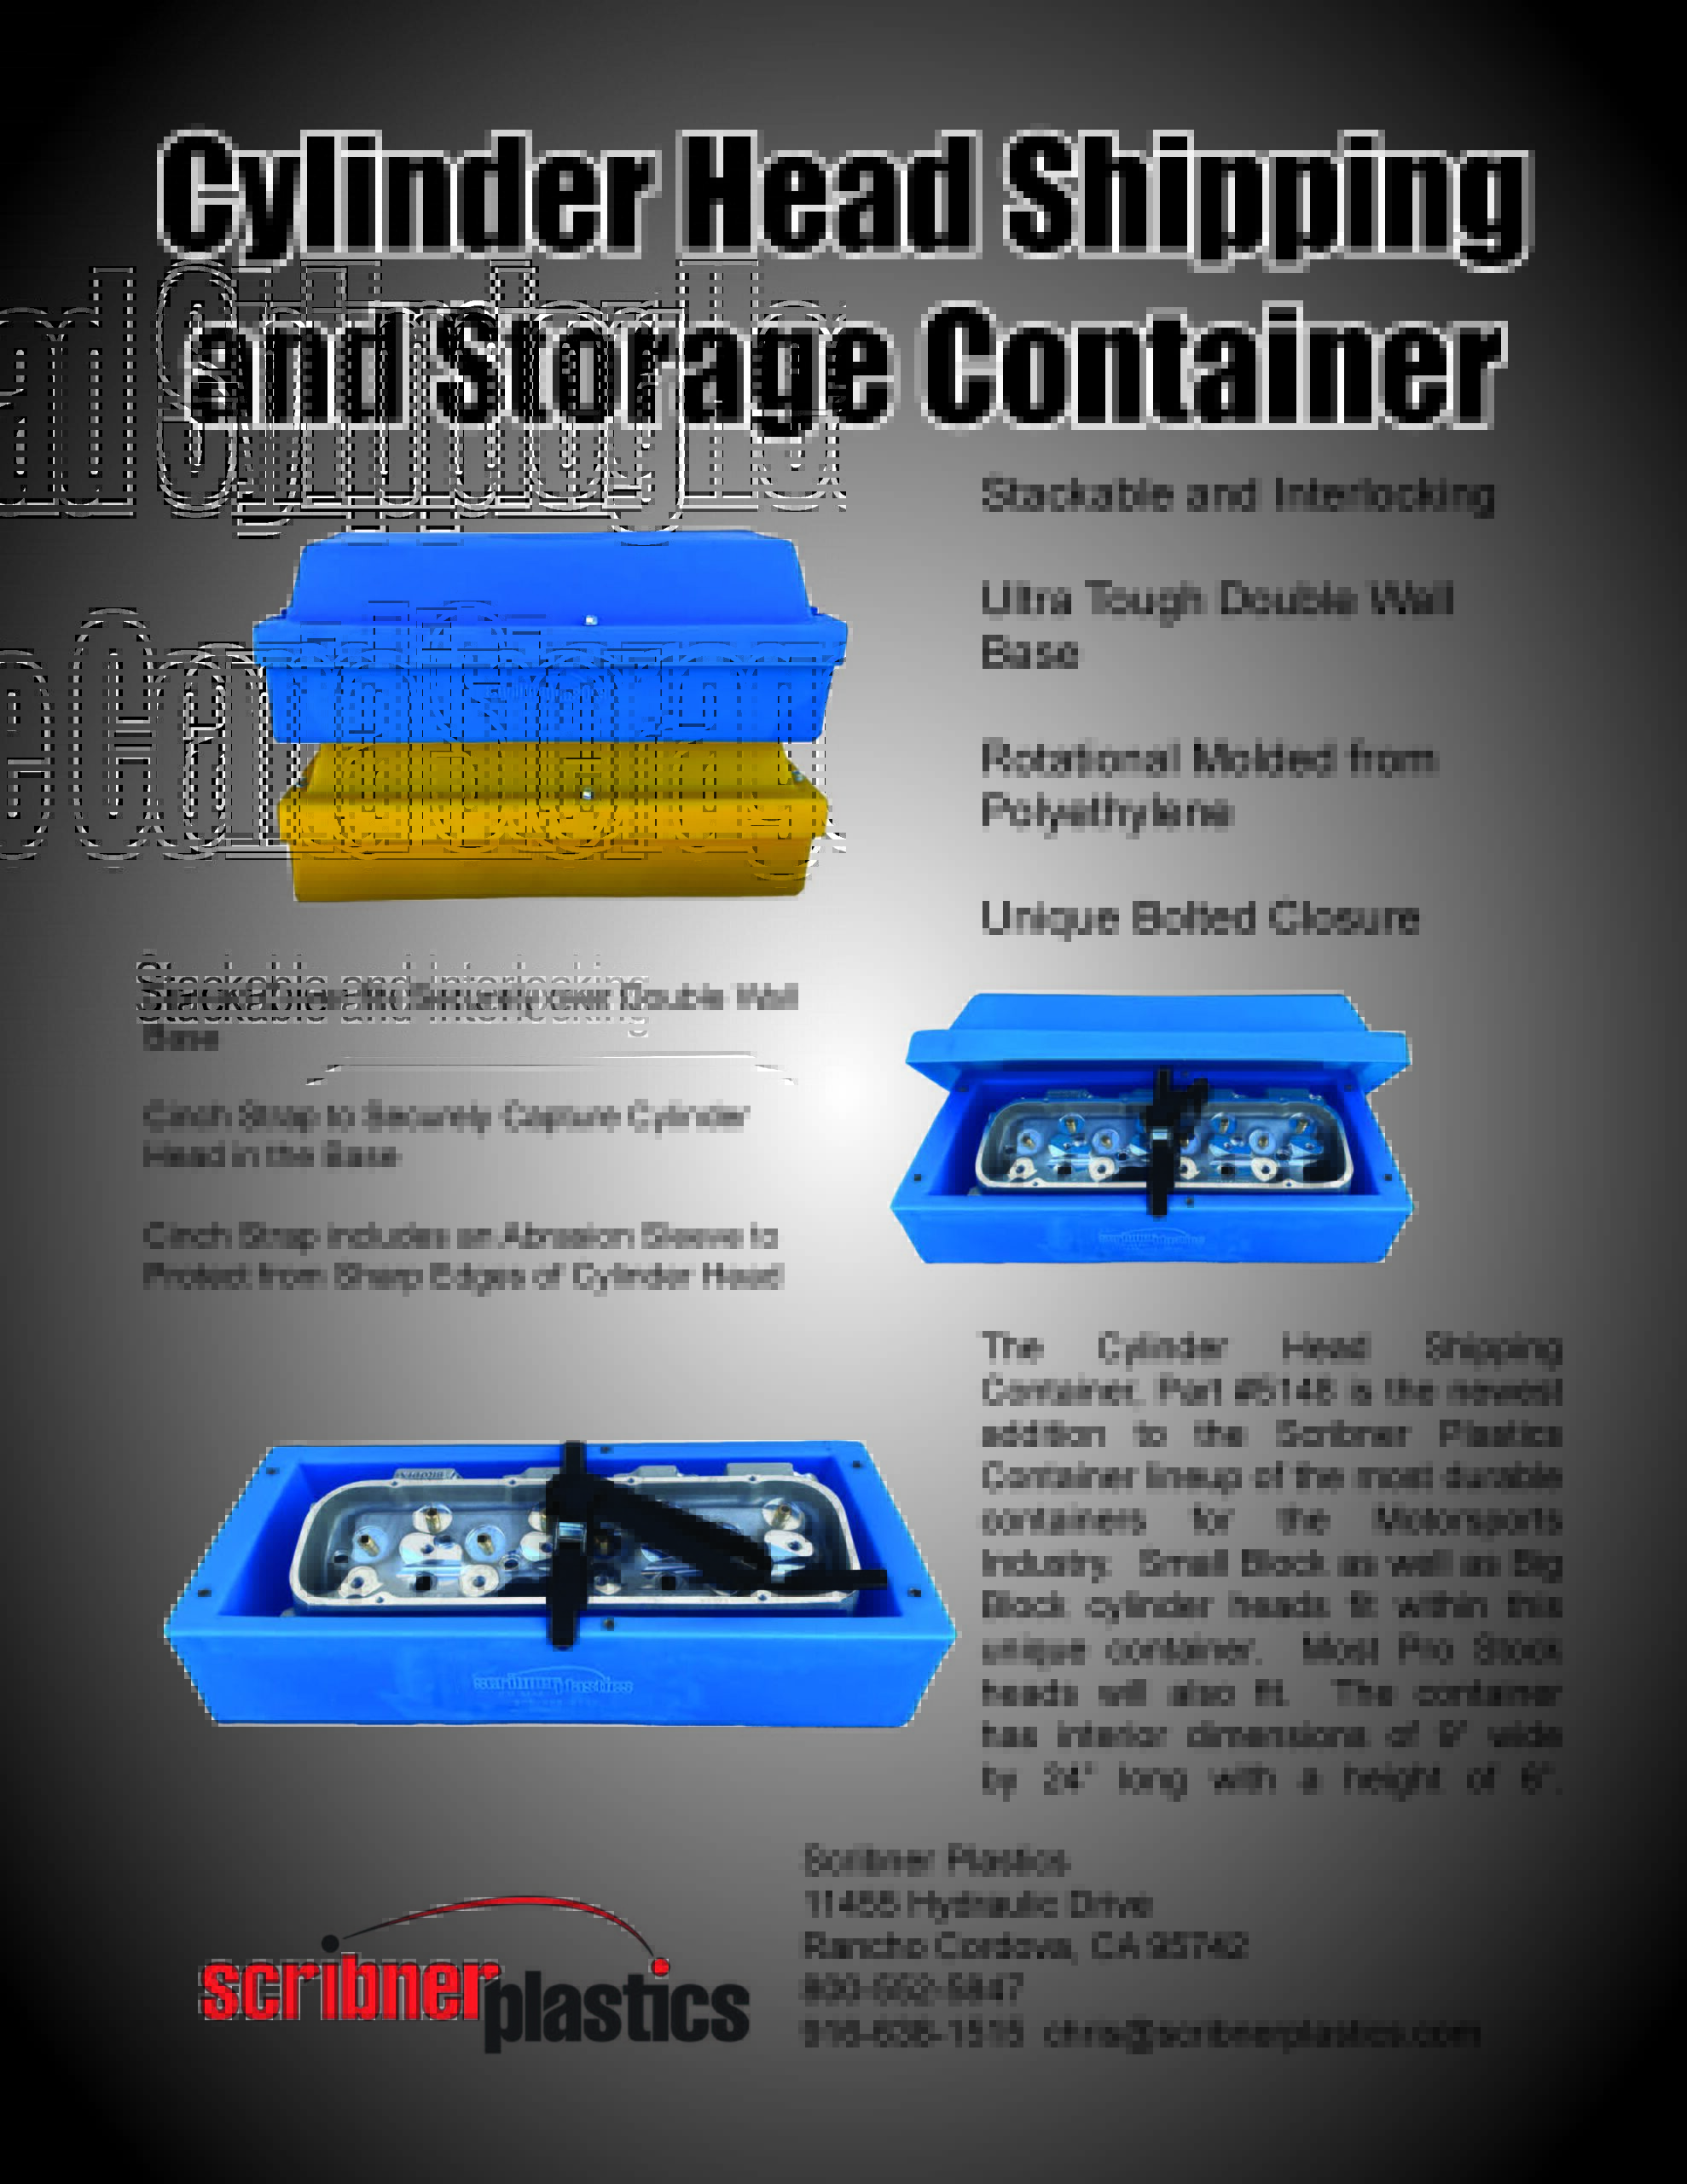 Cylinder head container flyer